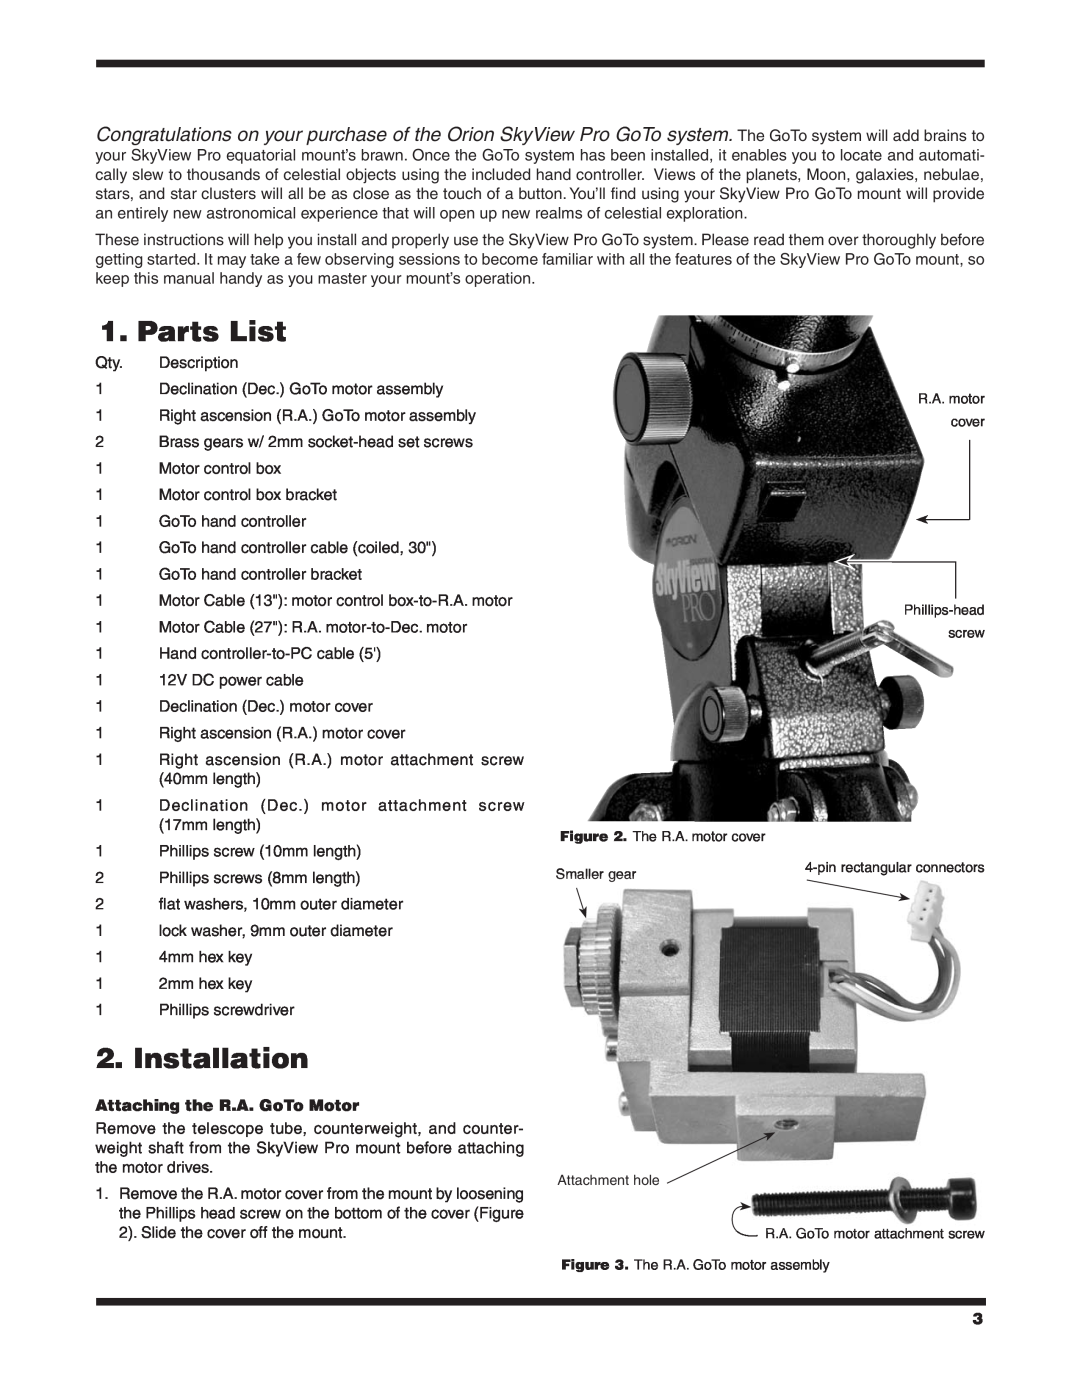 Orion 7817 instruction manual Parts List, Installation, Attaching the R.A. GoTo Motor 